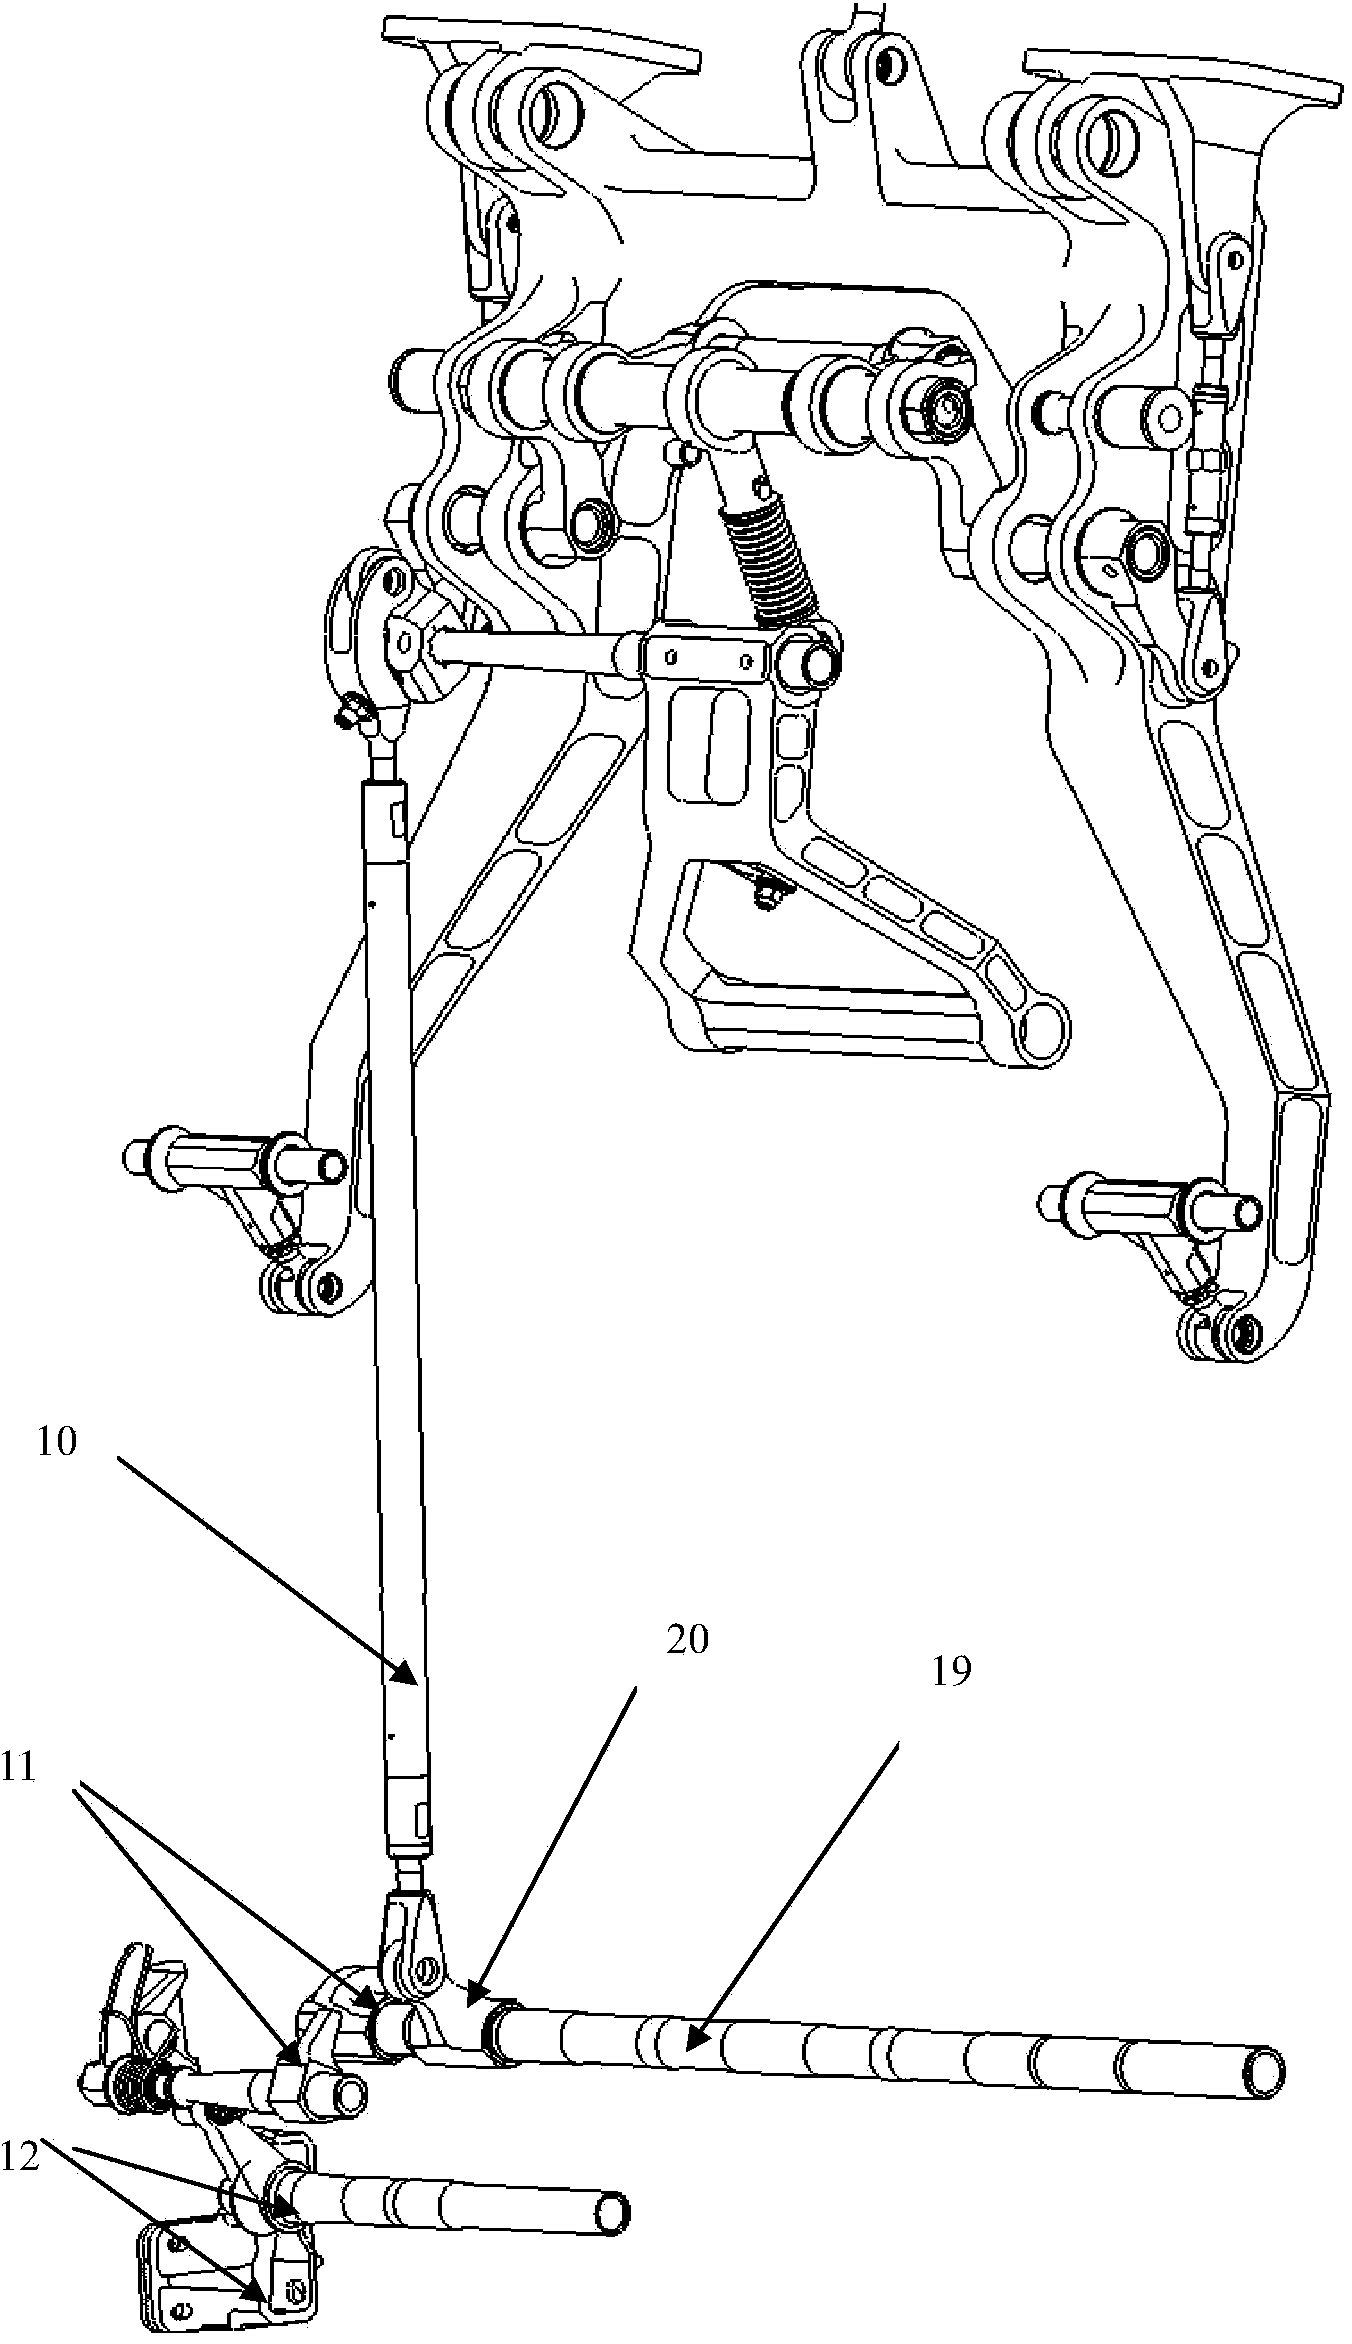 Lifting-opening linkage structure for turn-over airliner cabin door